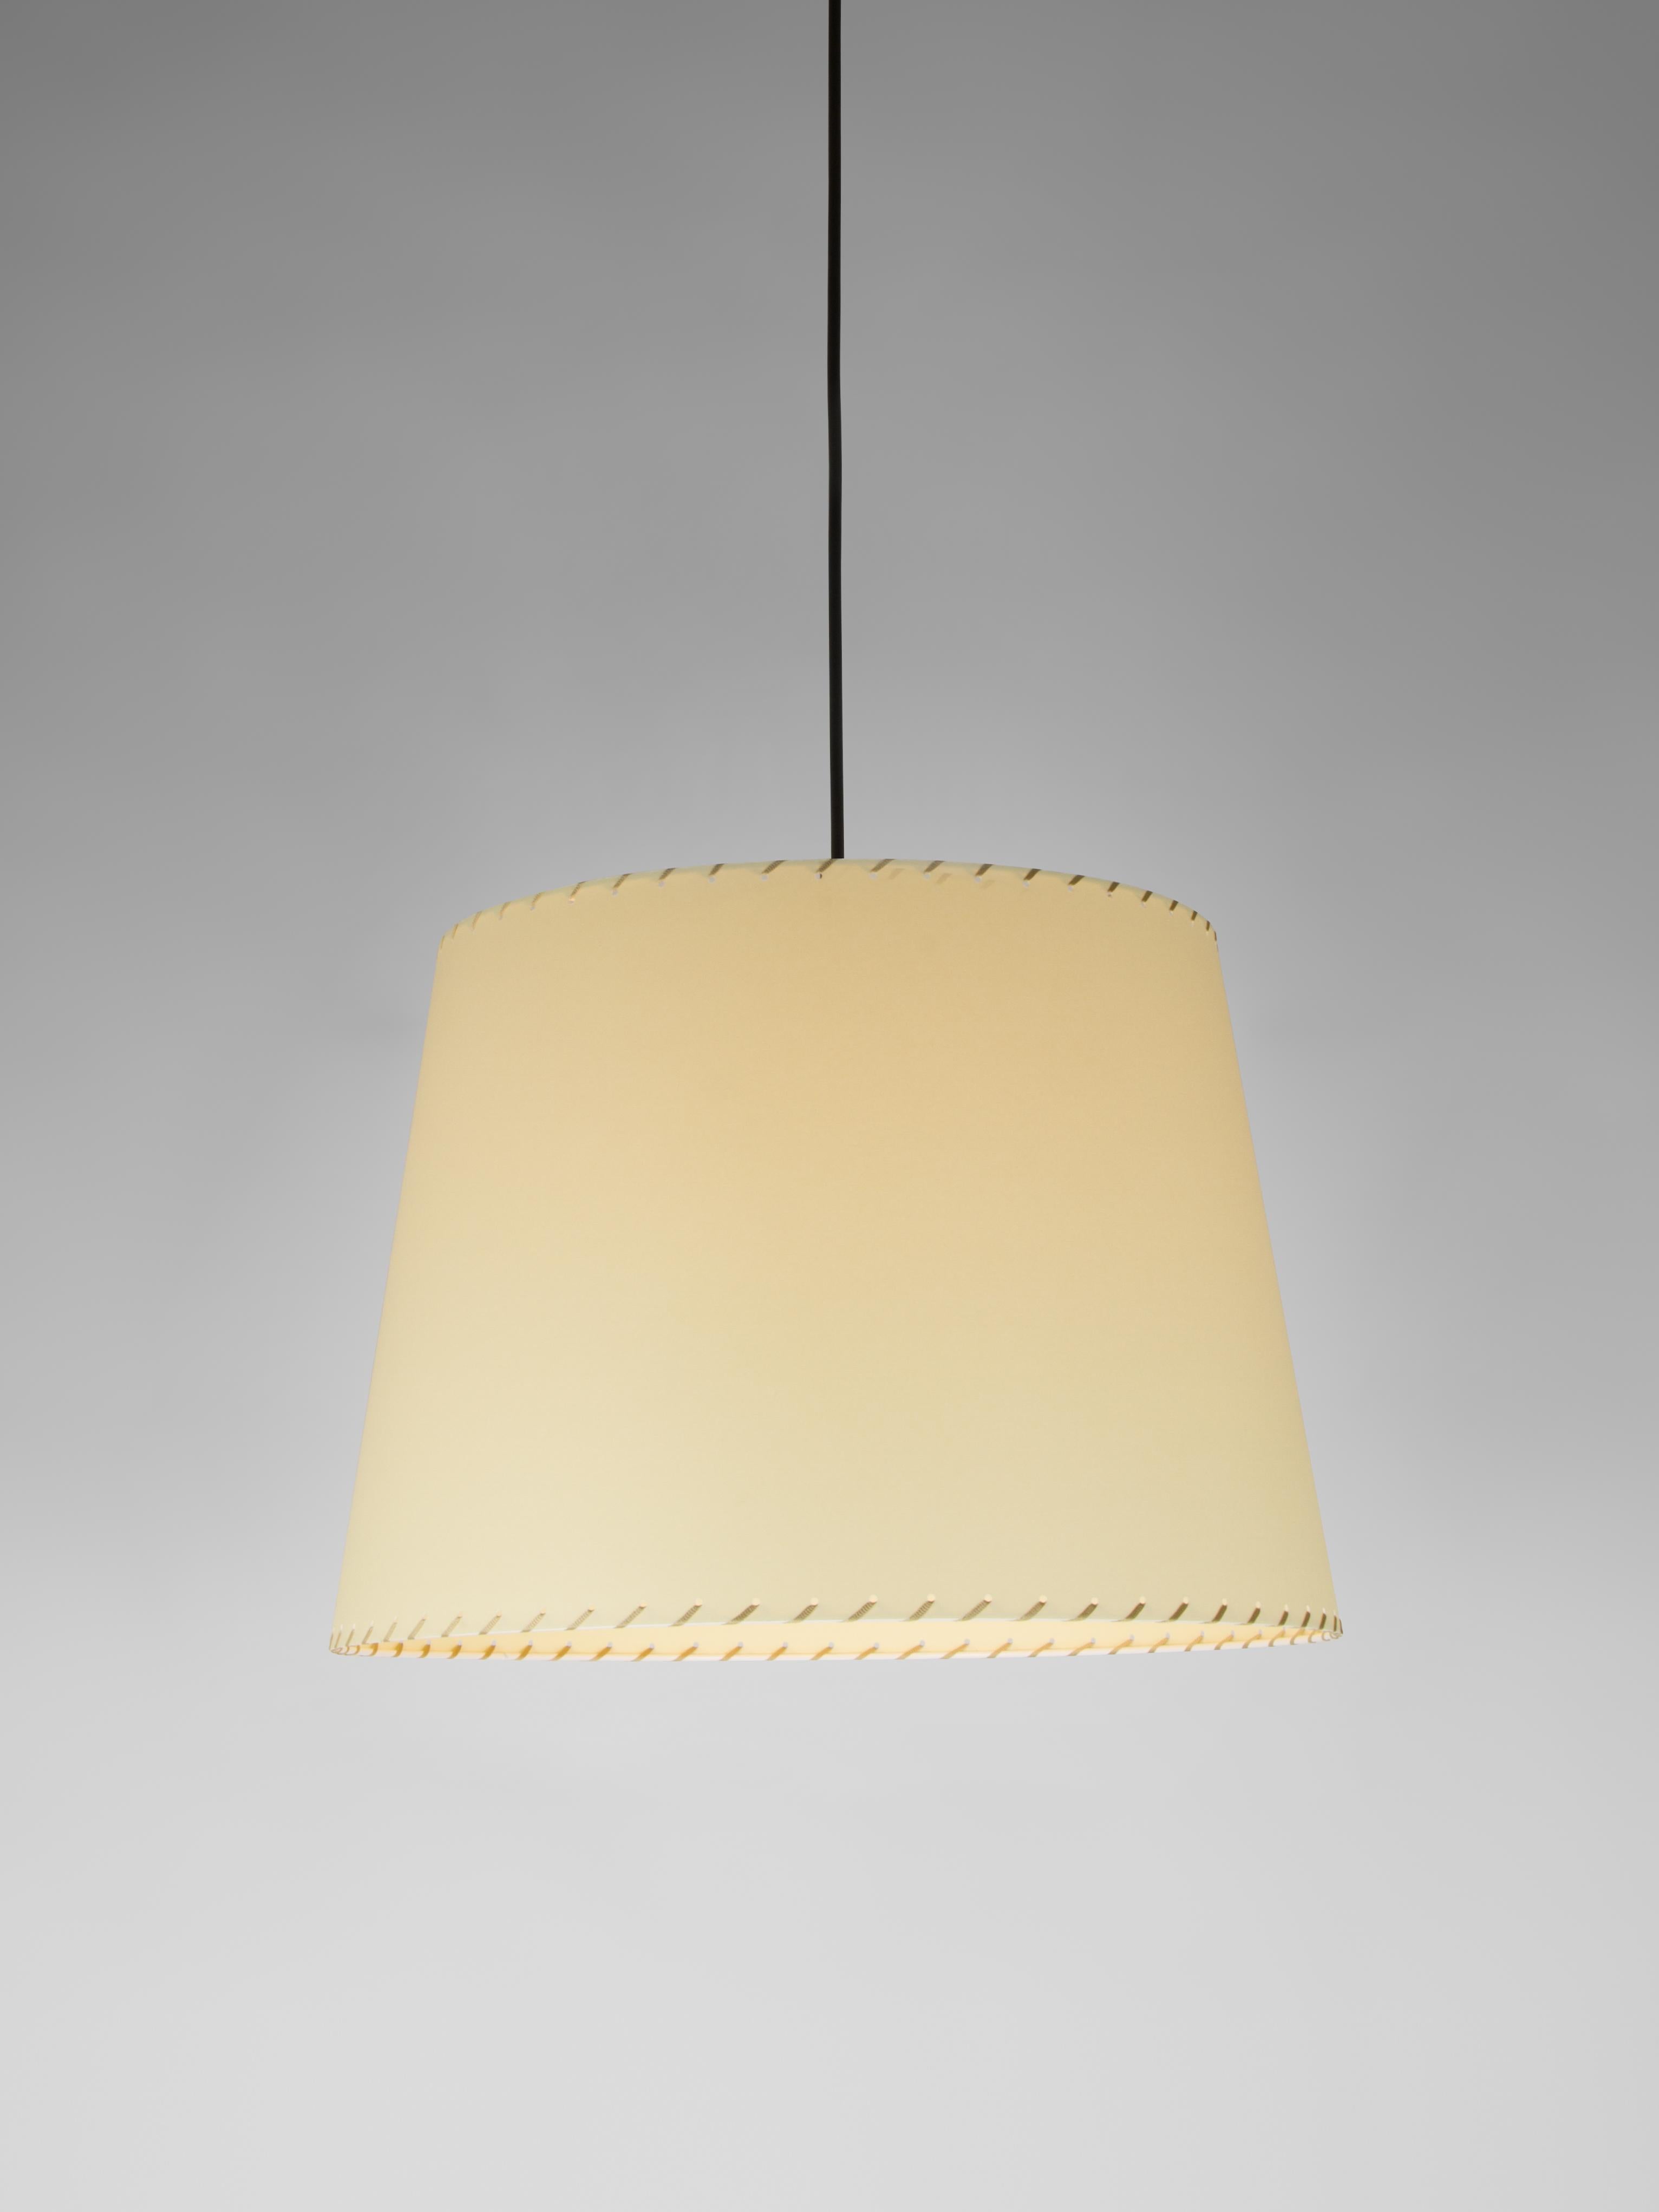 Beige sísísí cónicas GT1 pendant lamp by Santa & Cole
Dimensions: D 45 x H 32 cm
Materials: Metal, stitched parchment.
Available in other colors.
Also available in two lights version.

The conical shape group has multiple finishes and sizes.